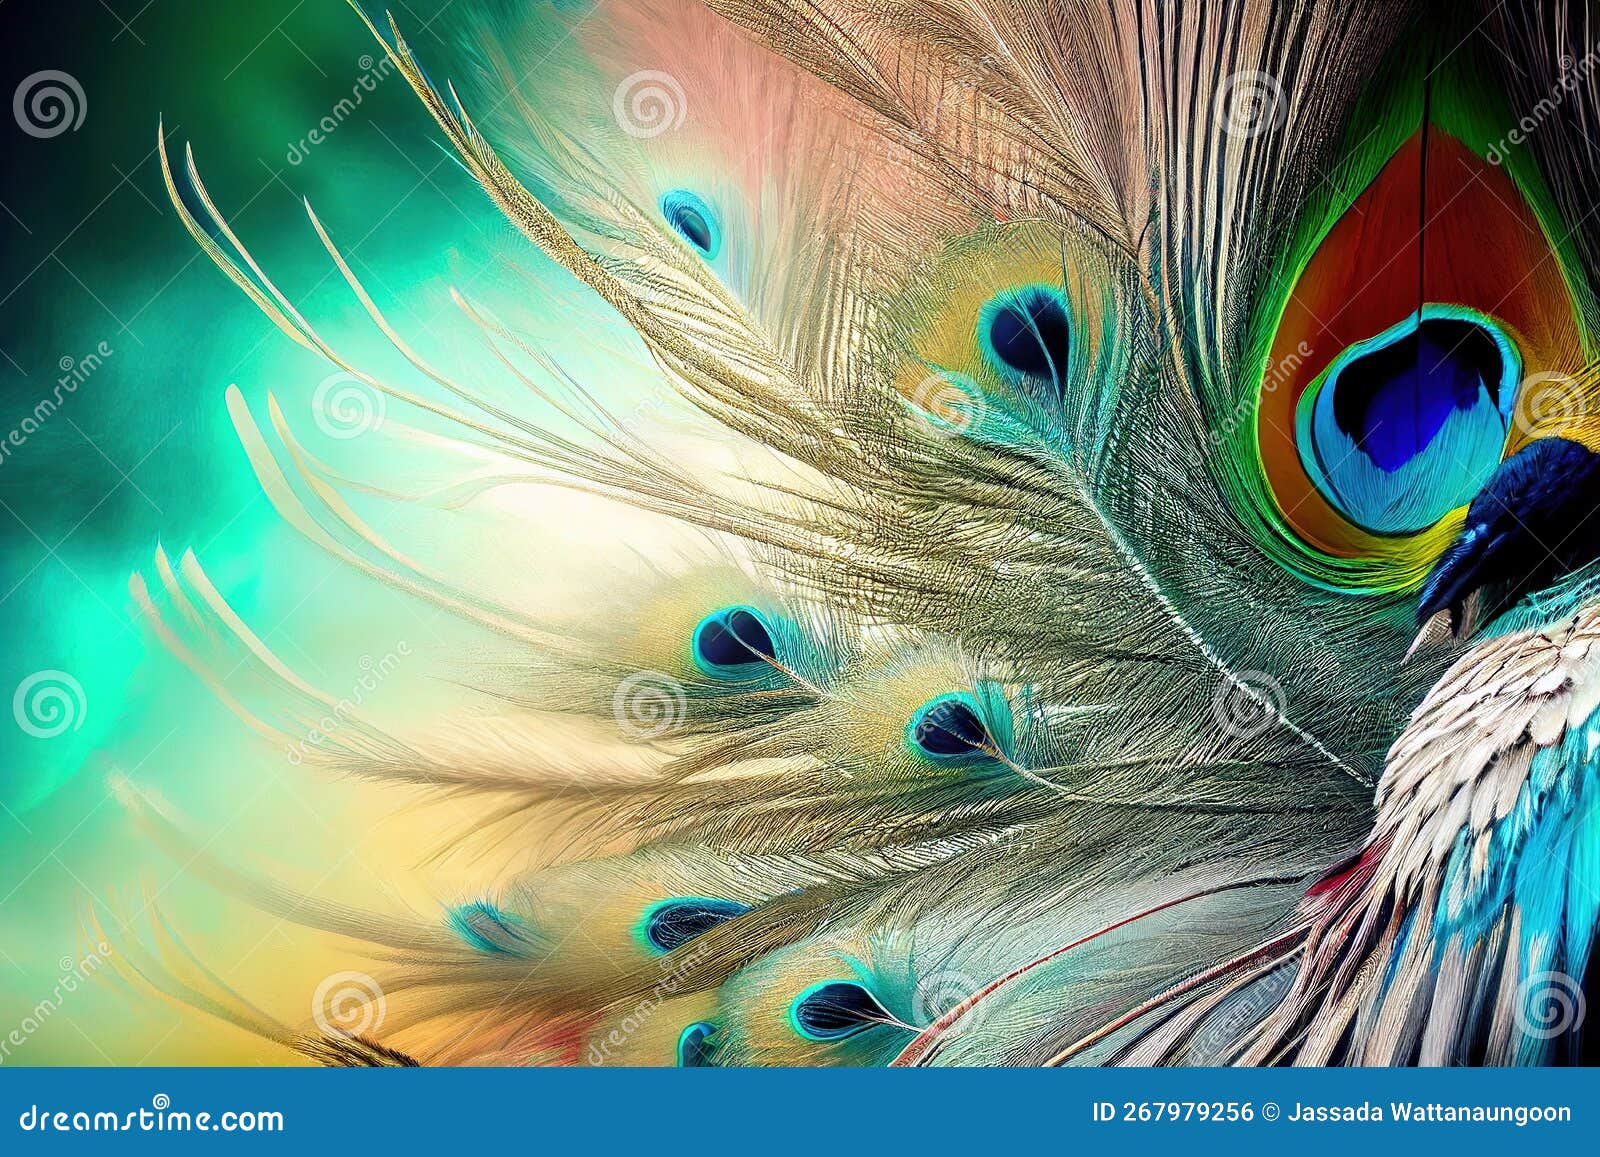 Abstract Beautiful Soft Feathers Peacock Stock Illustration ...